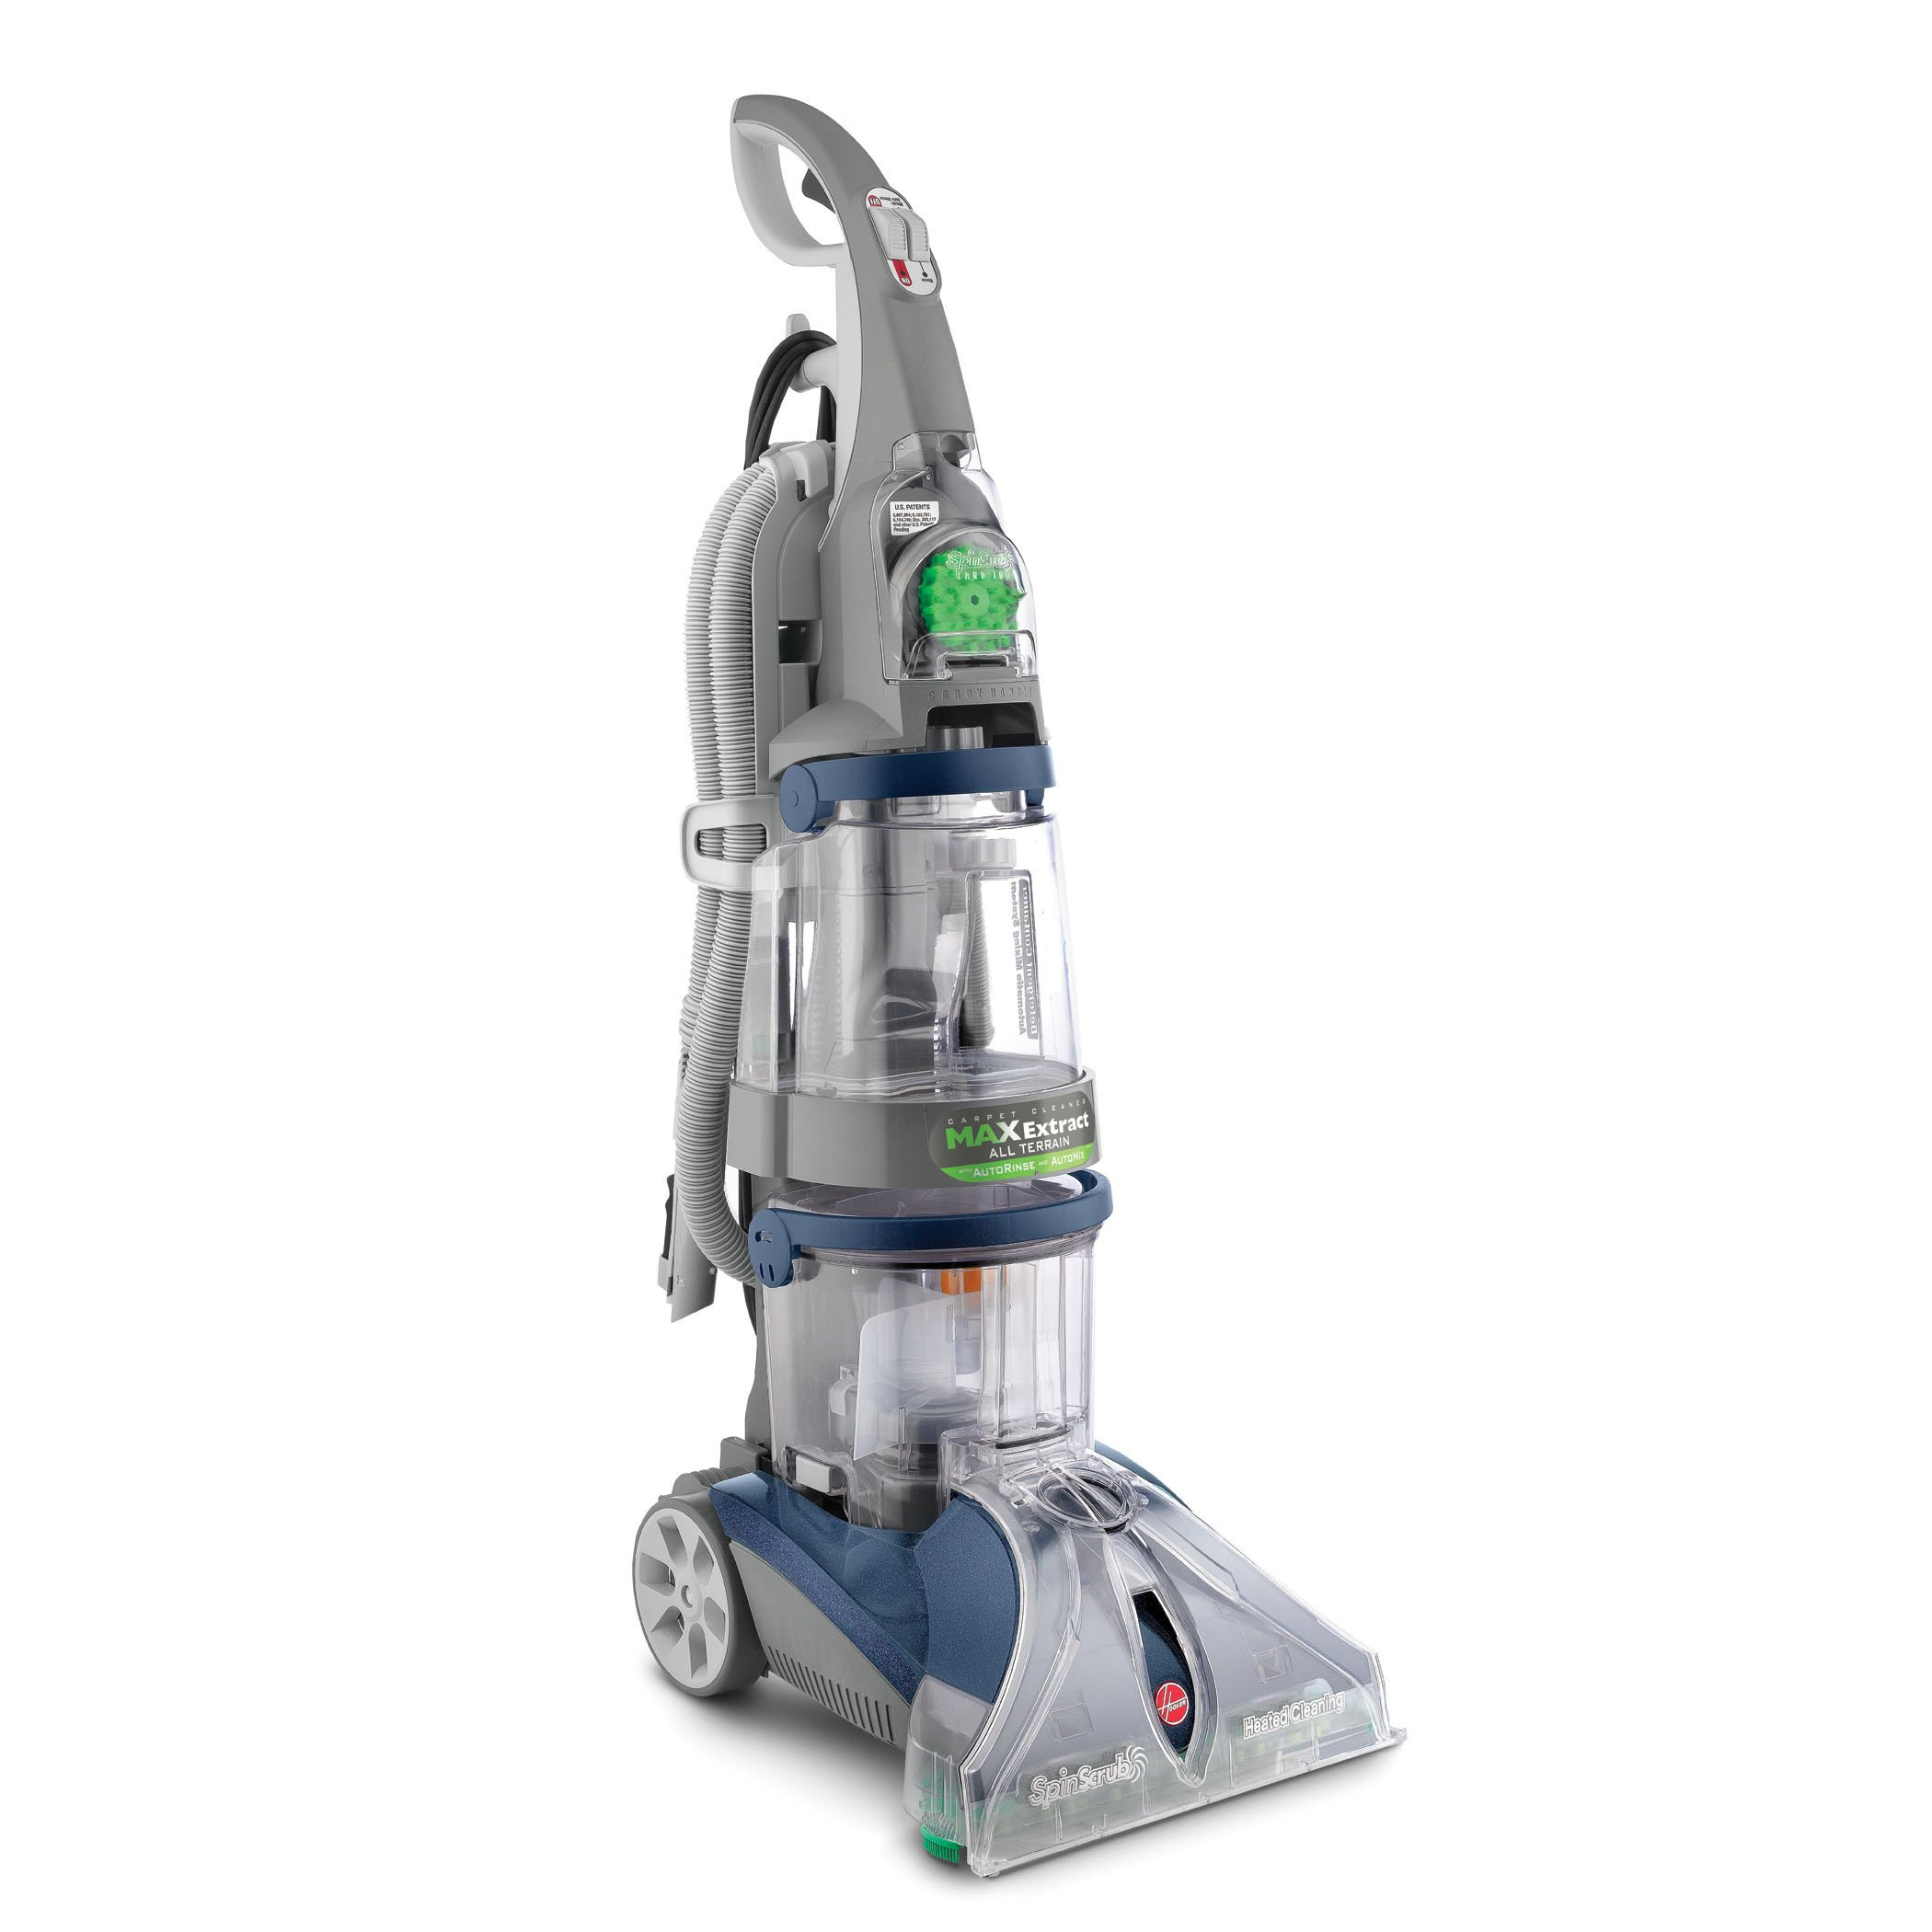 20 Perfect Vacuum with Hardwood Floor attachment 2024 free download vacuum with hardwood floor attachment of shop hoover f7452 900 steamvac all terrain 6 brush dual v deep within shop hoover f7452 900 steamvac all terrain 6 brush dual v deep cleaner free shi